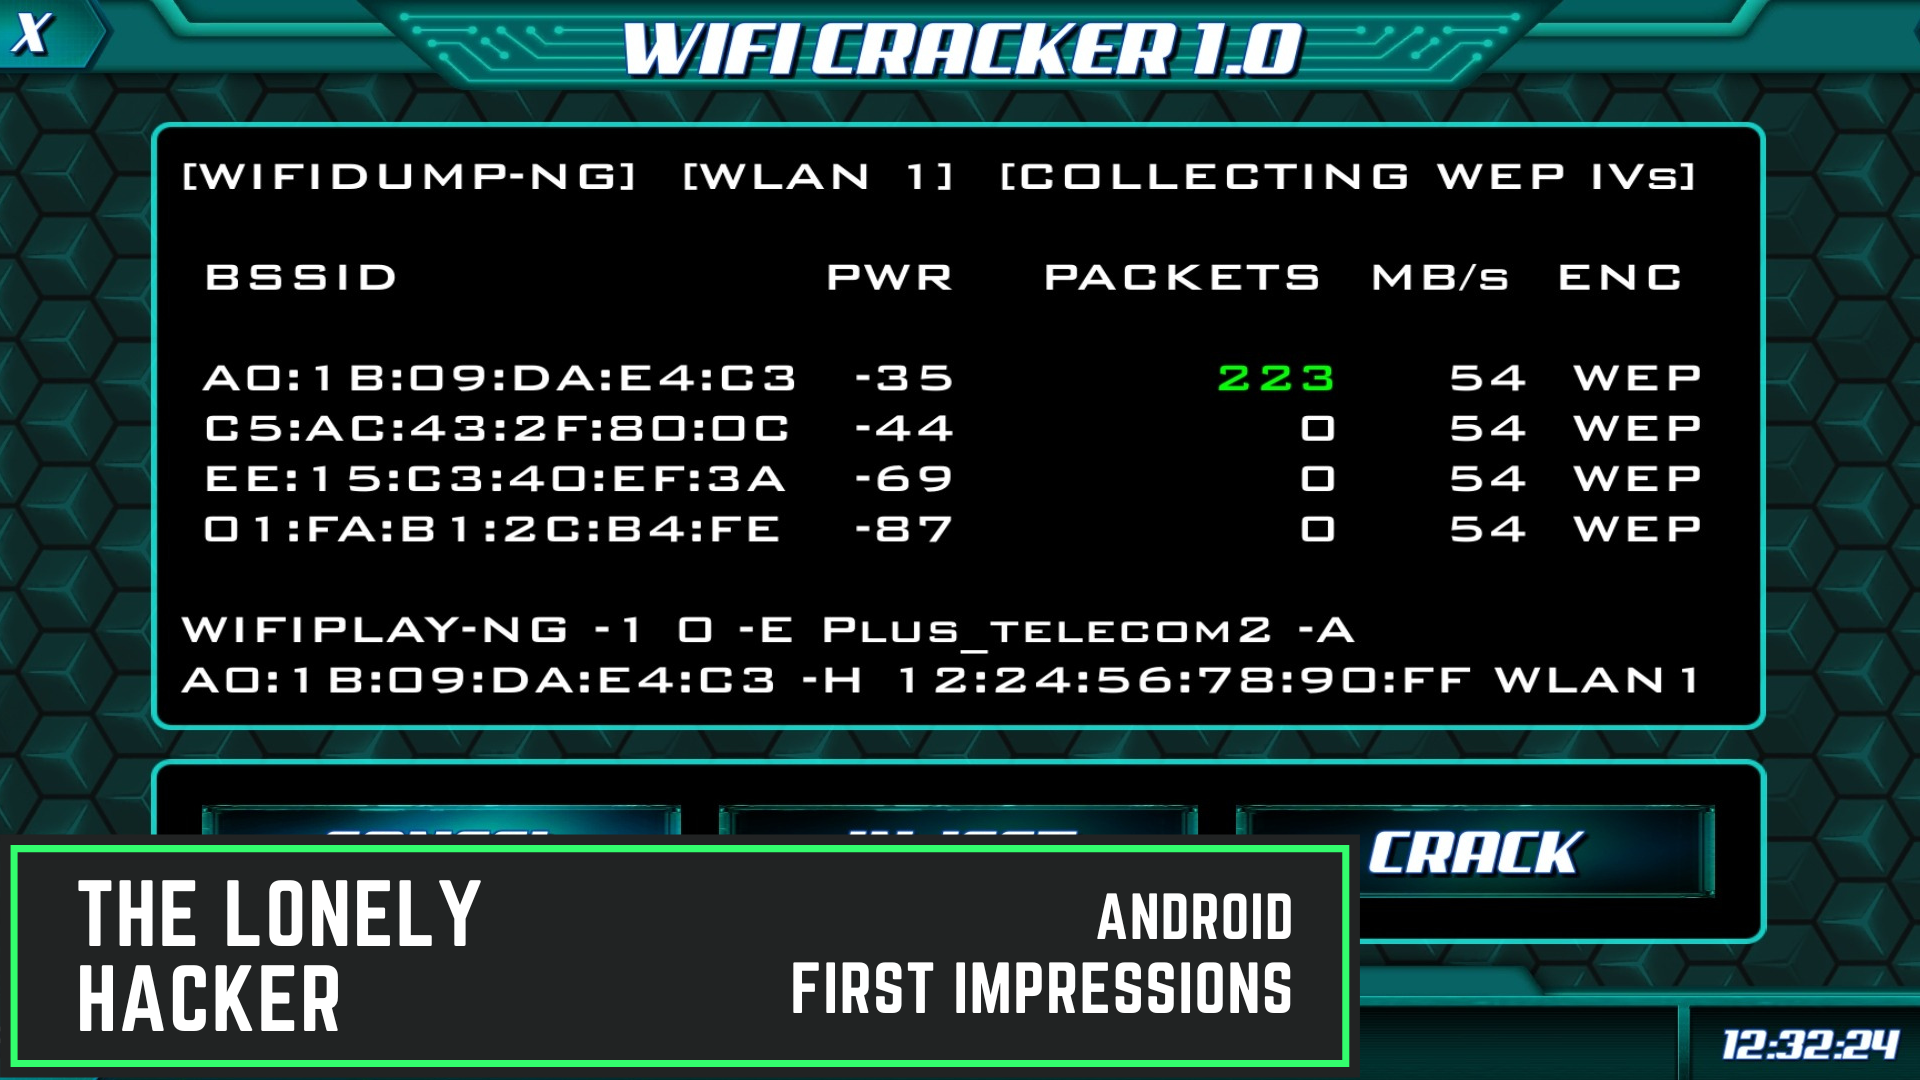 The Lonely Hacker, the most realistic hacking simulation game, is avai